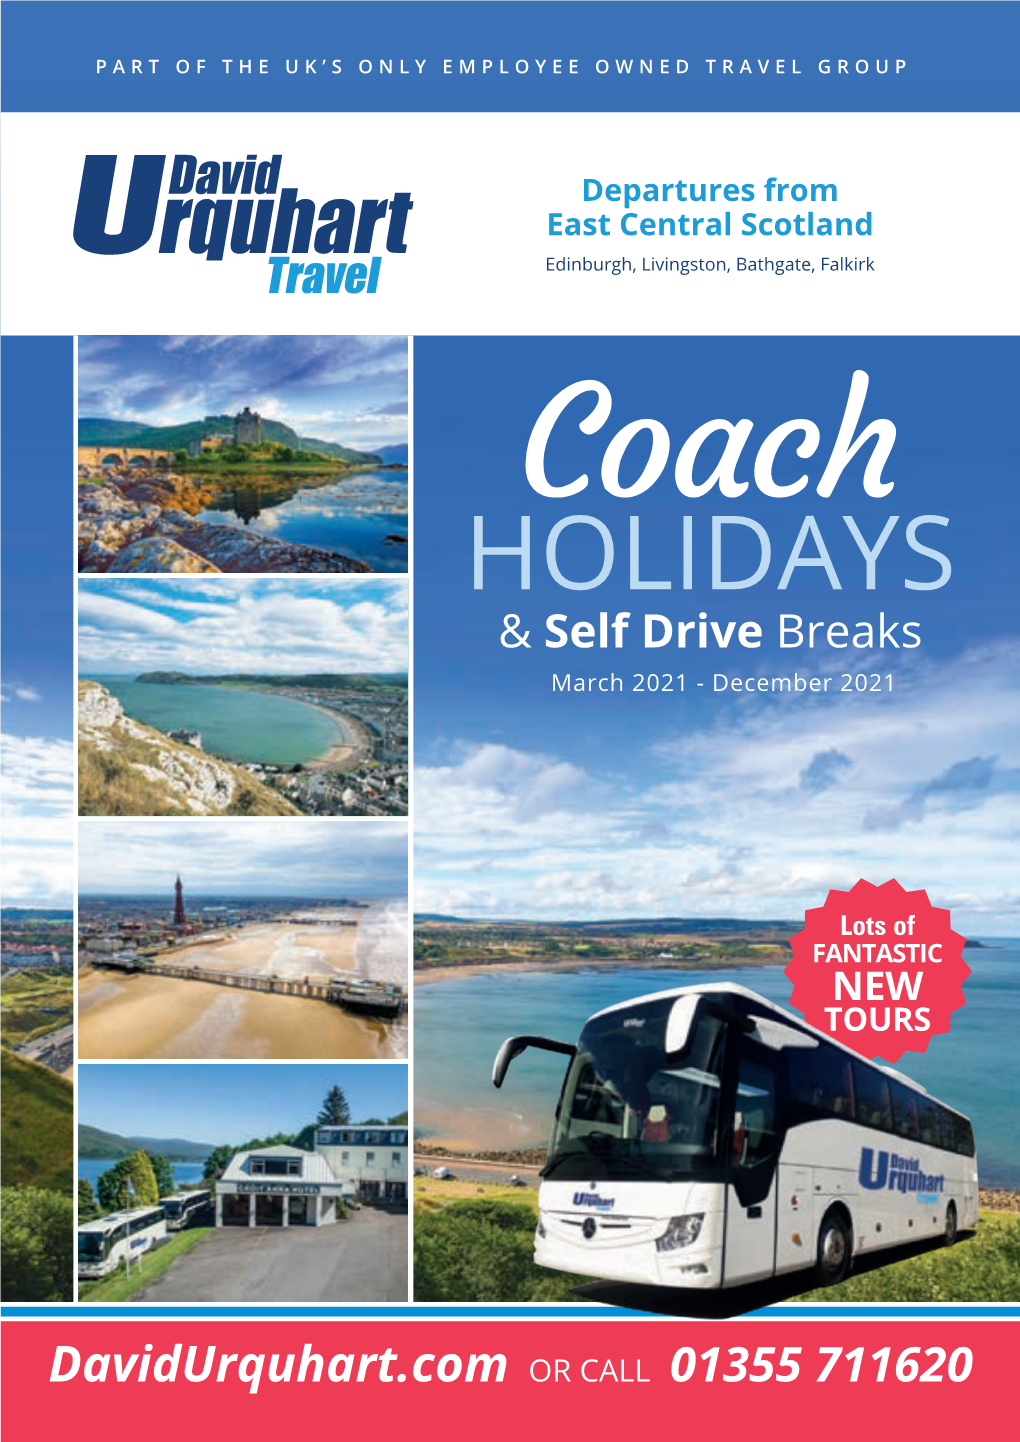 HOLIDAYS & Self Drive Breaks March 2021 - December 2021